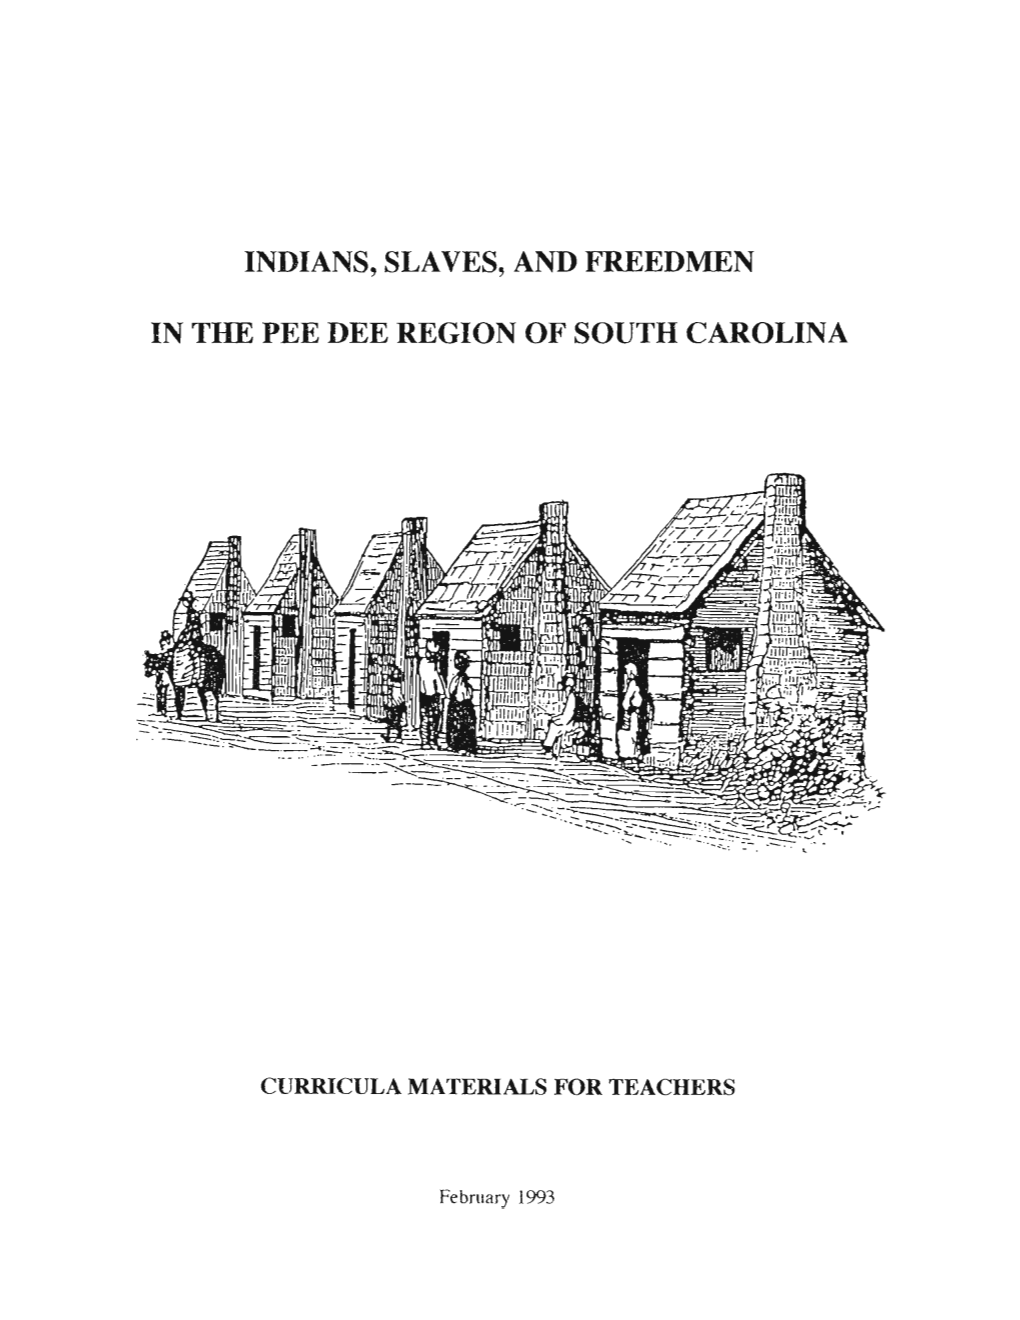 Indians, Slaves, and Freedment in the Pee Dee Region of South Carolina